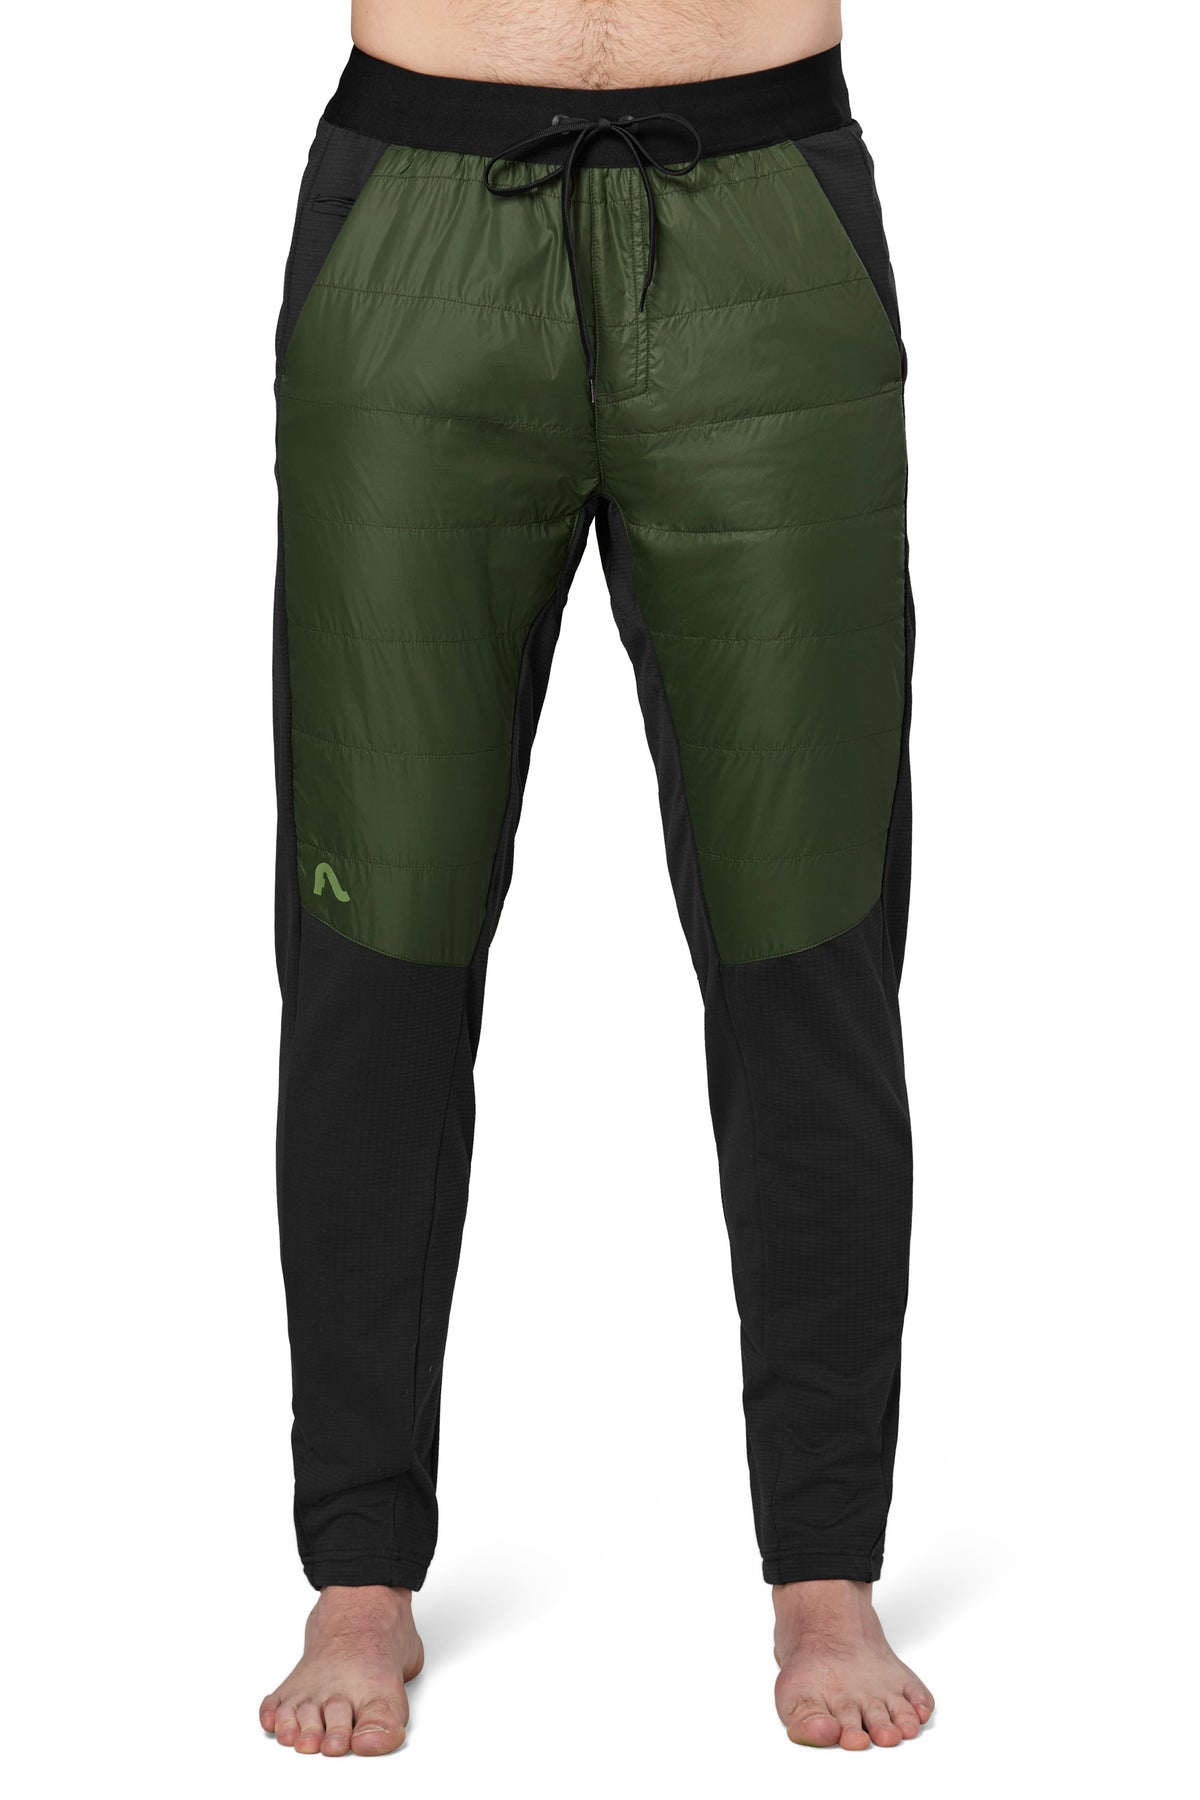 Men's Puffer Pant - Insulated Baselayers | Flylow – Flylow Gear